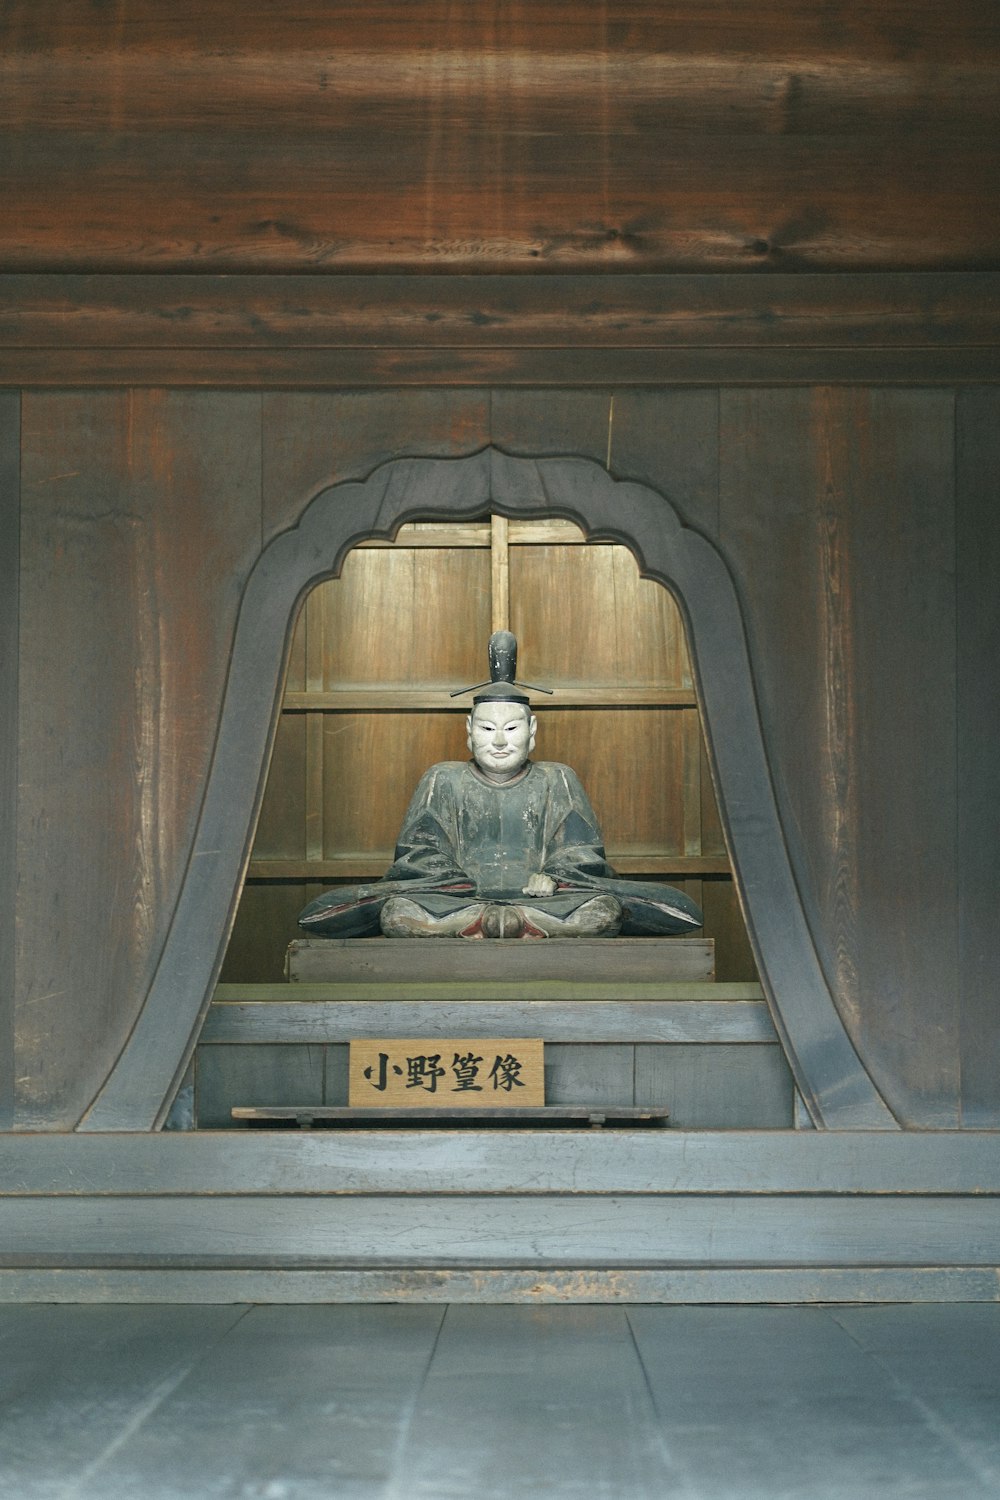 a statue of a person sitting in a shrine